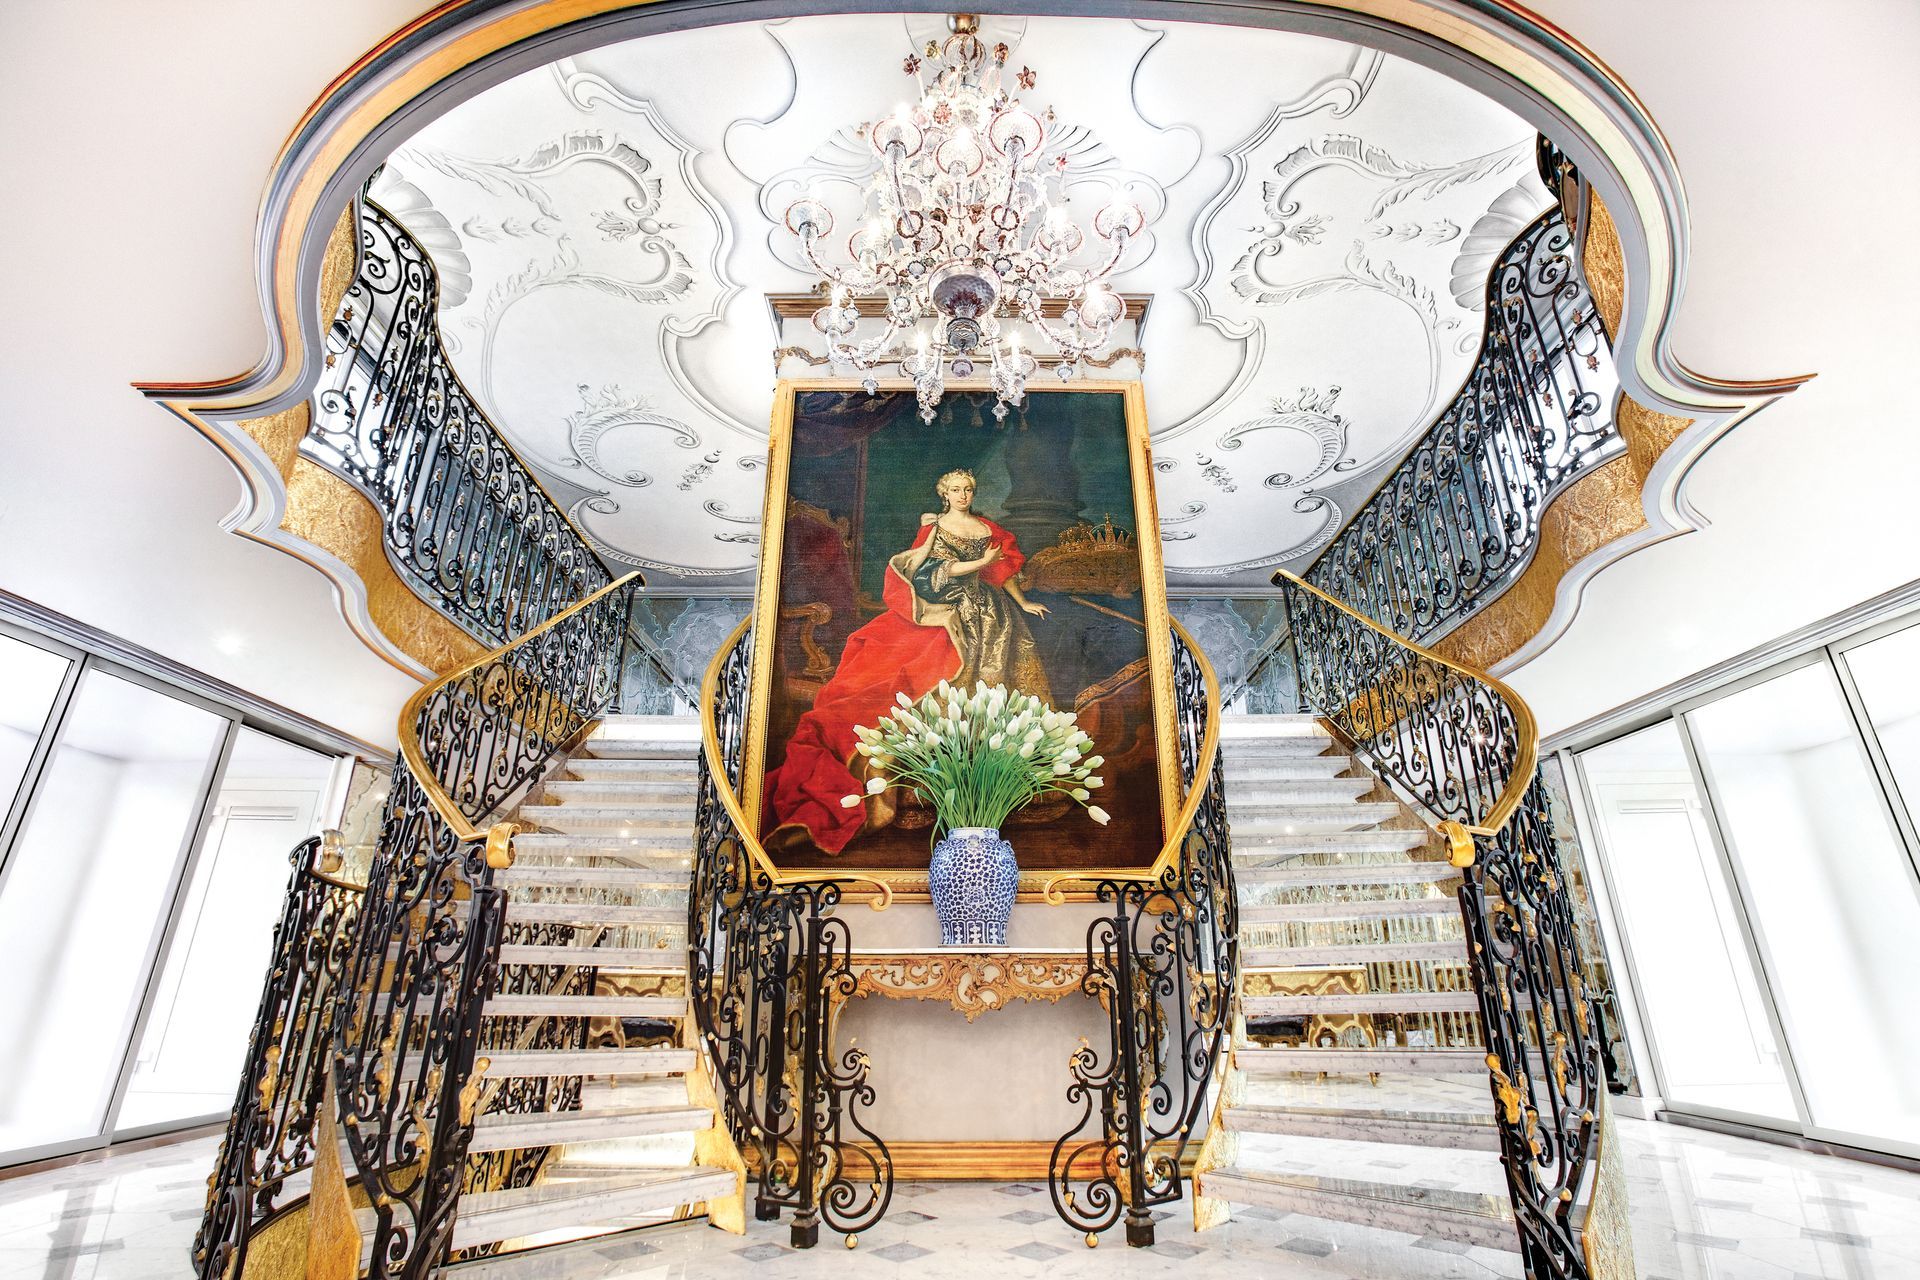 Luxurious Lobby Details Cruise with a Big painting and stairs on the sides - Uniworld River Cruises Barter's Travelnet